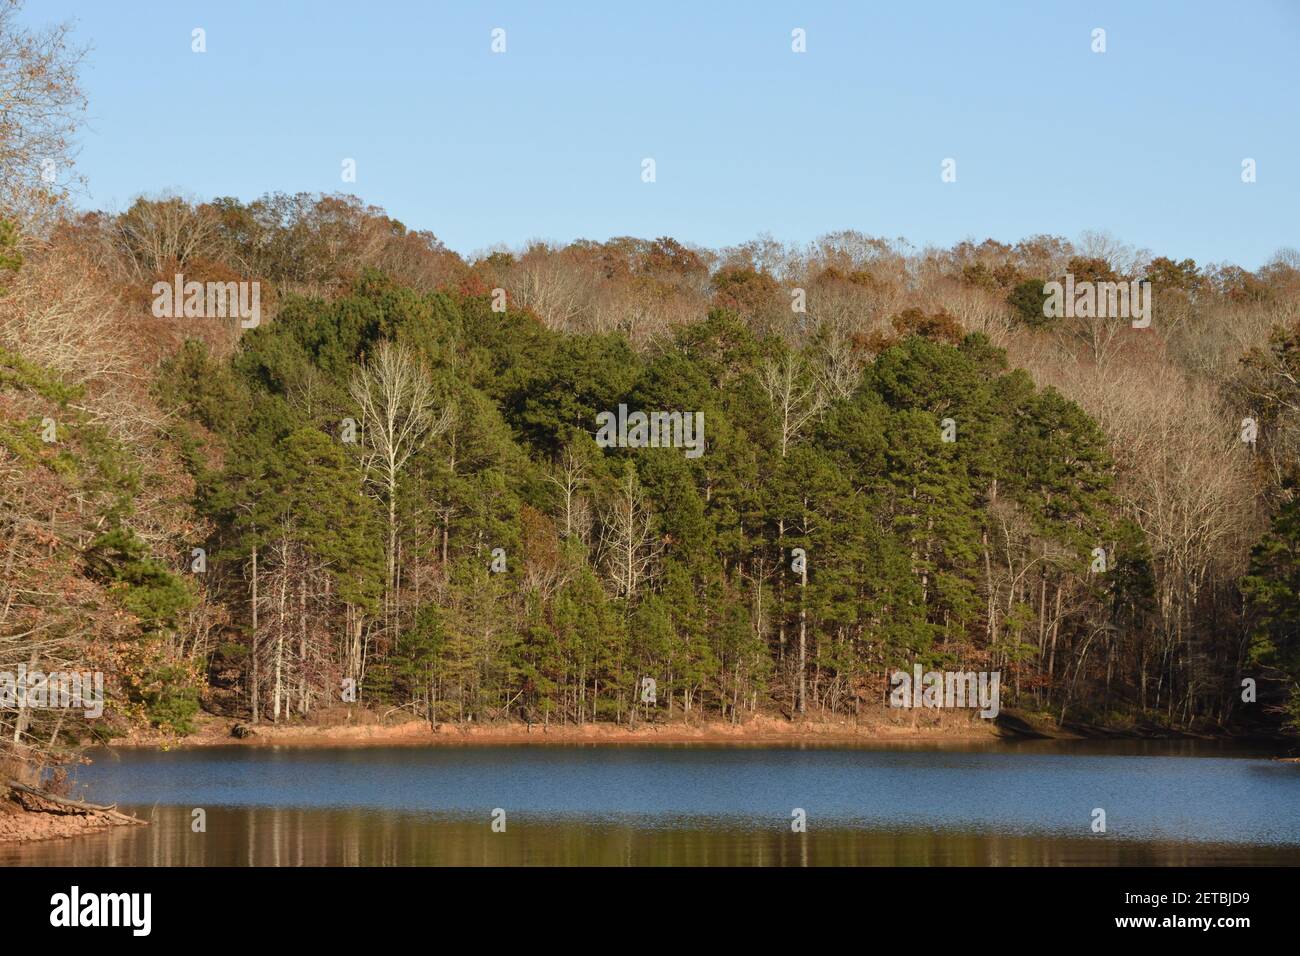 Lake Lanier, the largest lake in Georgia, USA with lush forest in the background. Stock Photo